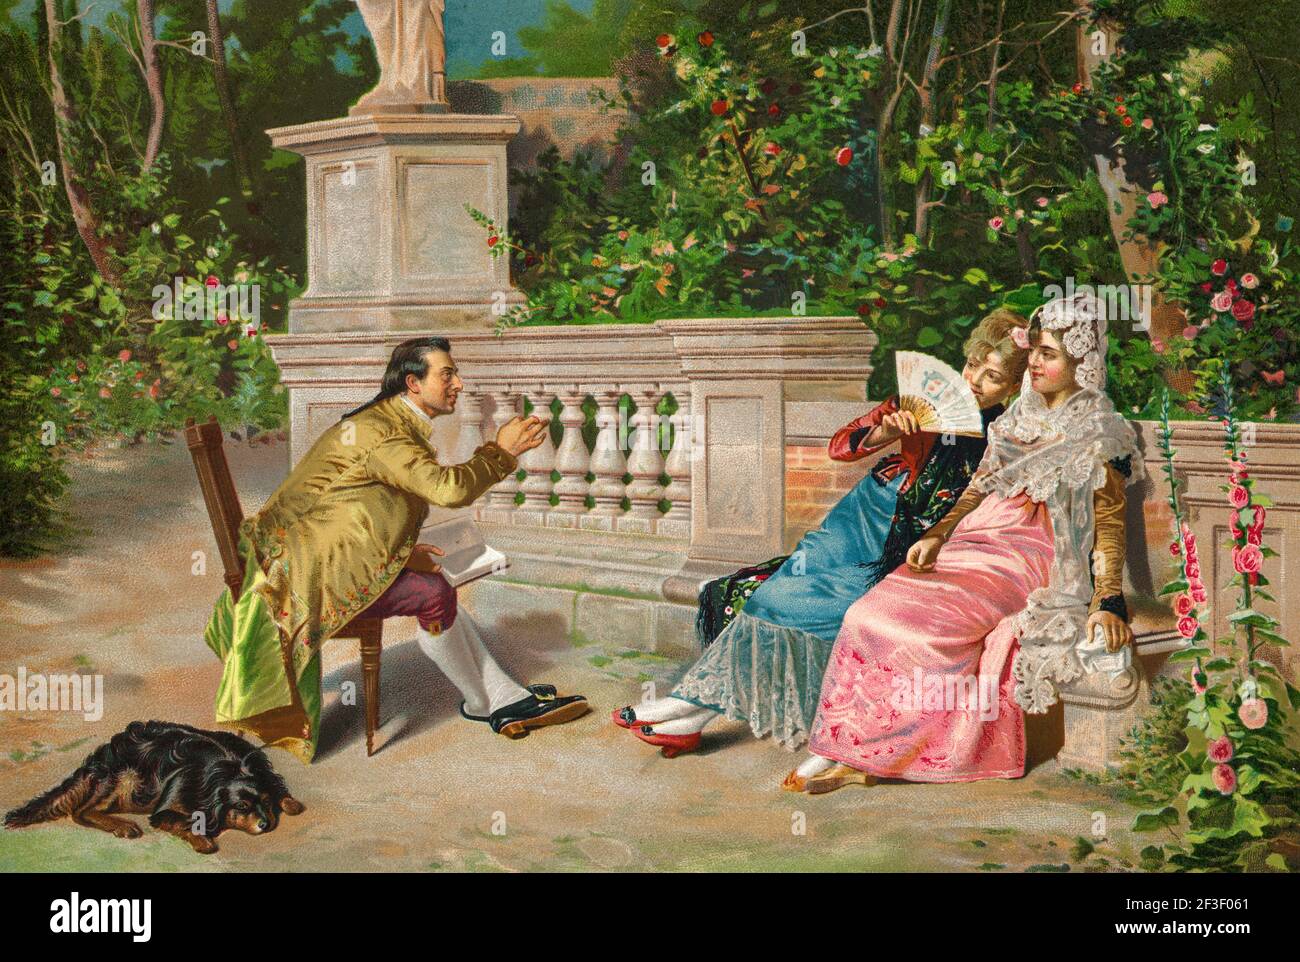 A man woos and reads a book to two women dressed in traditional 19th century costumes in a garden. Old 19th century color lithography illustration from El Mundo Ilustrado 1879 Stock Photo